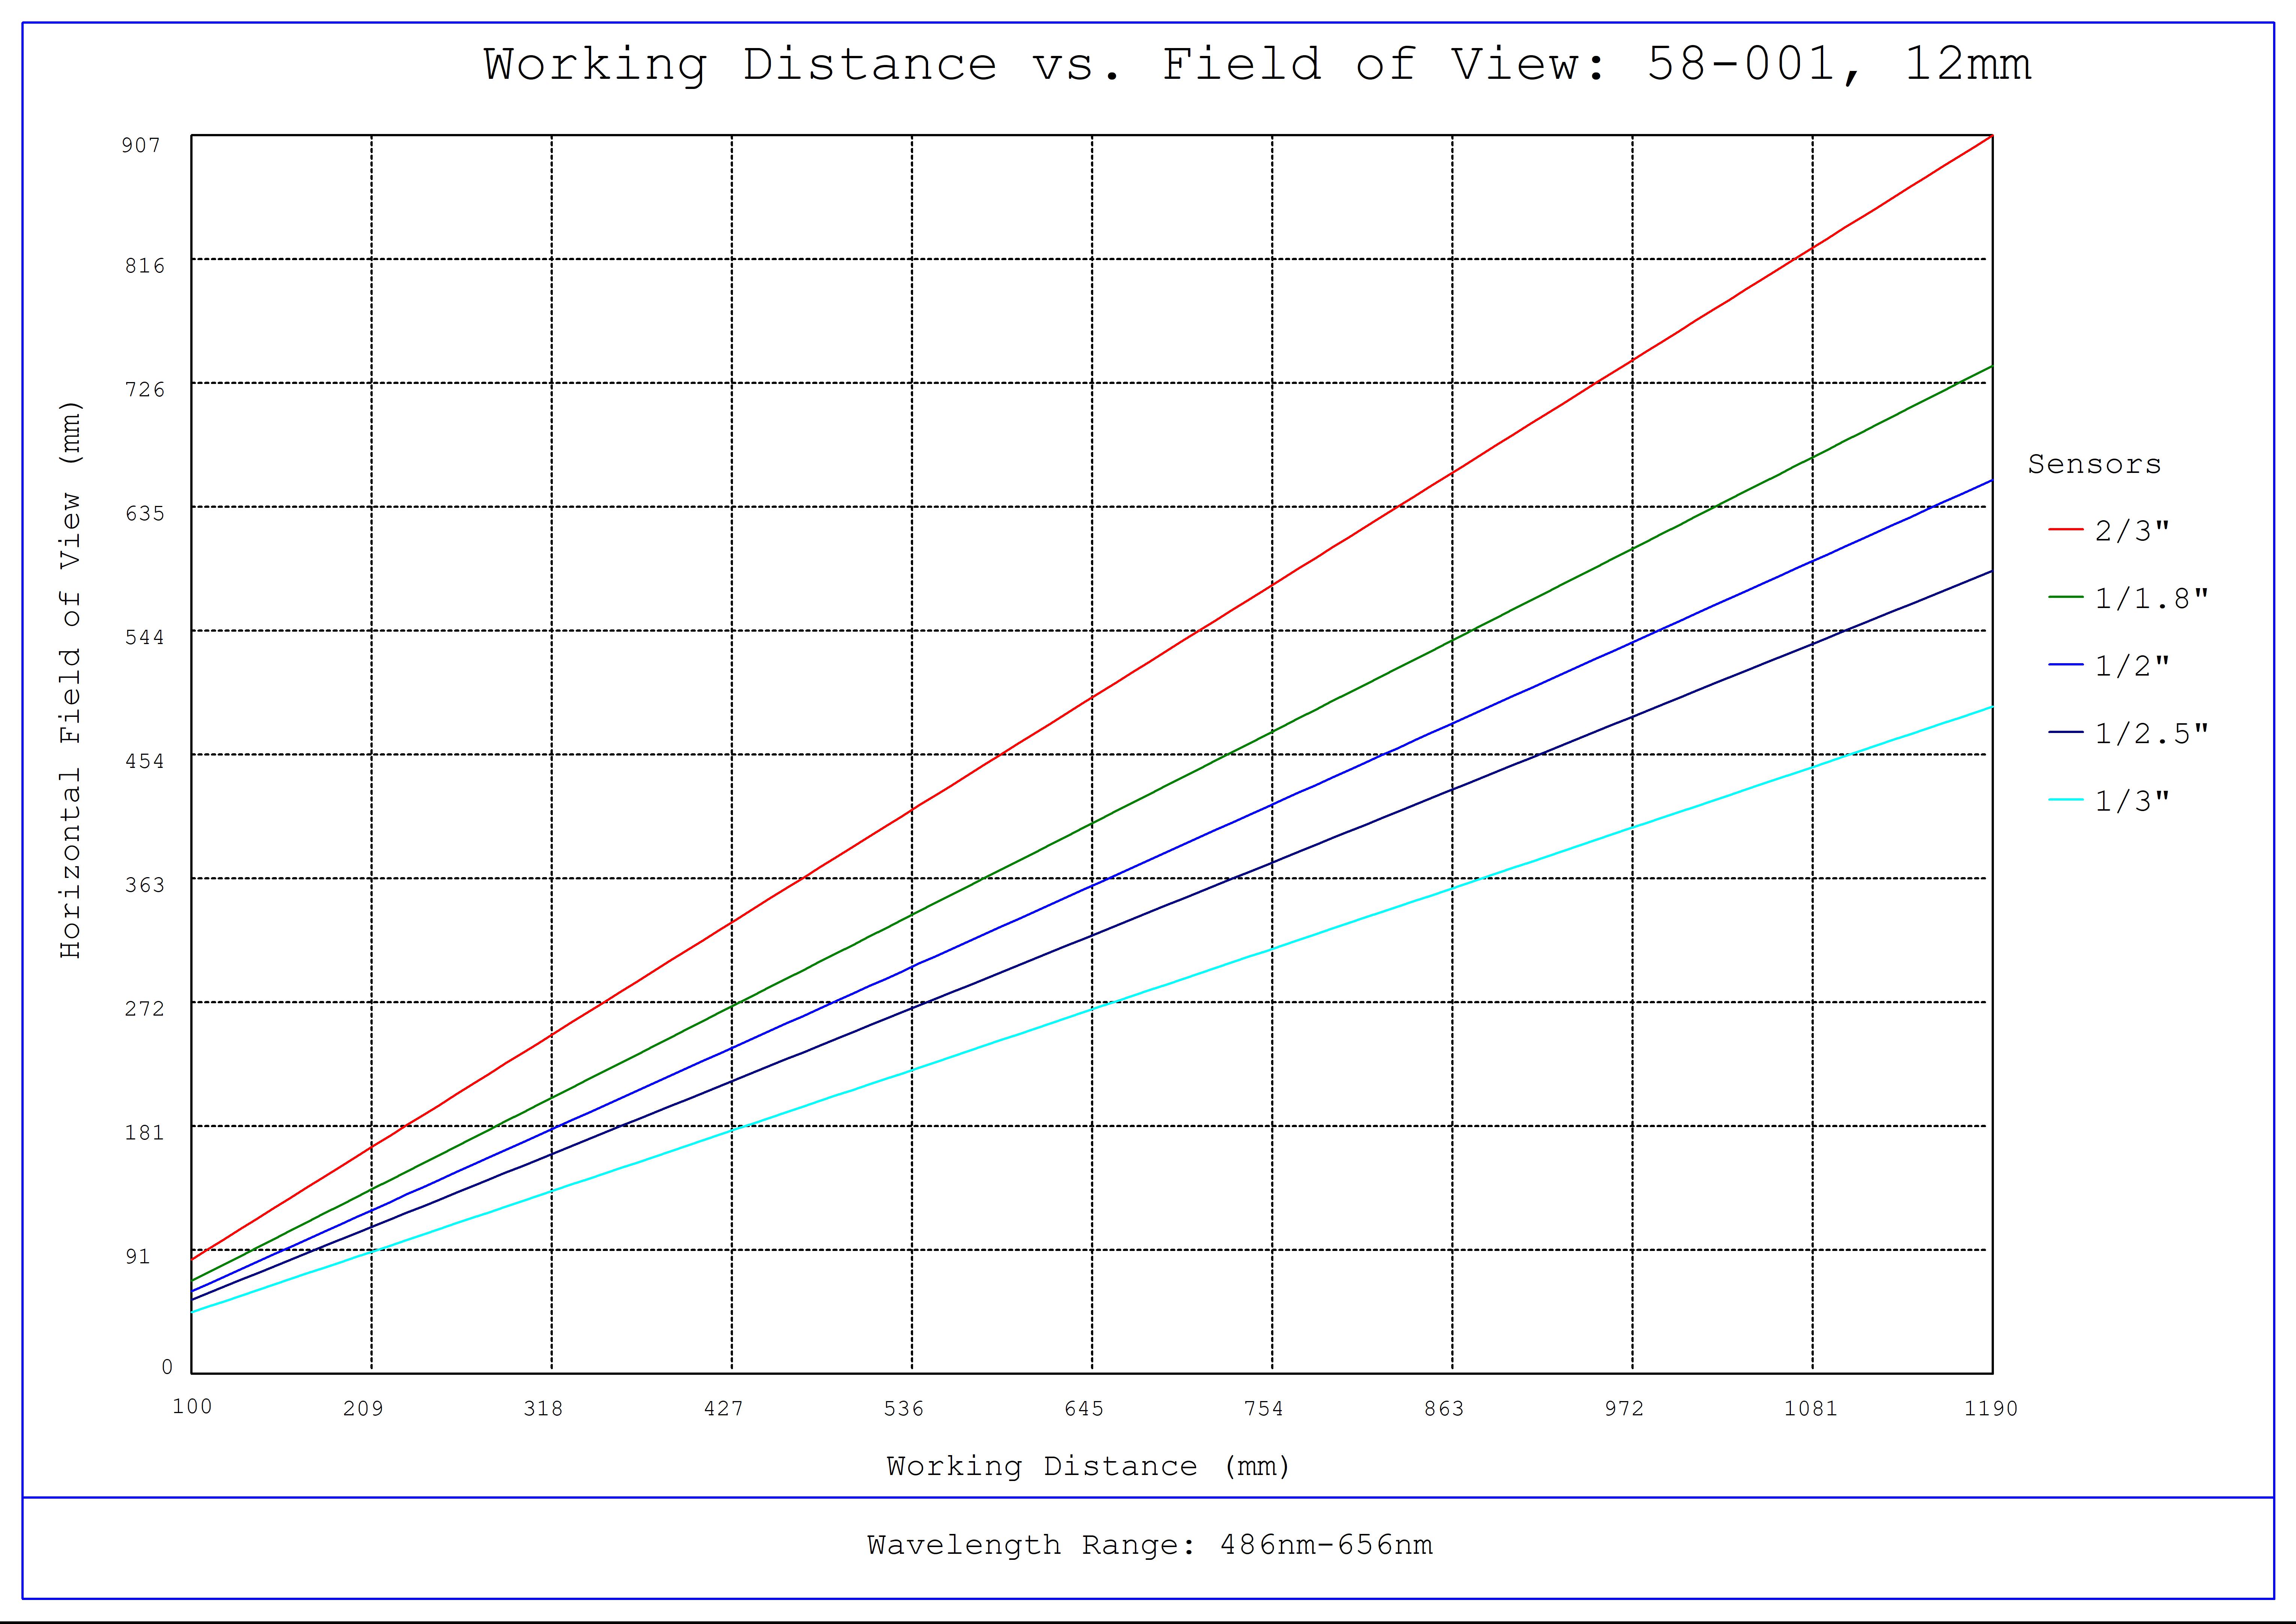 #58-001, 12mm C Series Fixed Focal Length Lens, Working Distance versus Field of View Plot